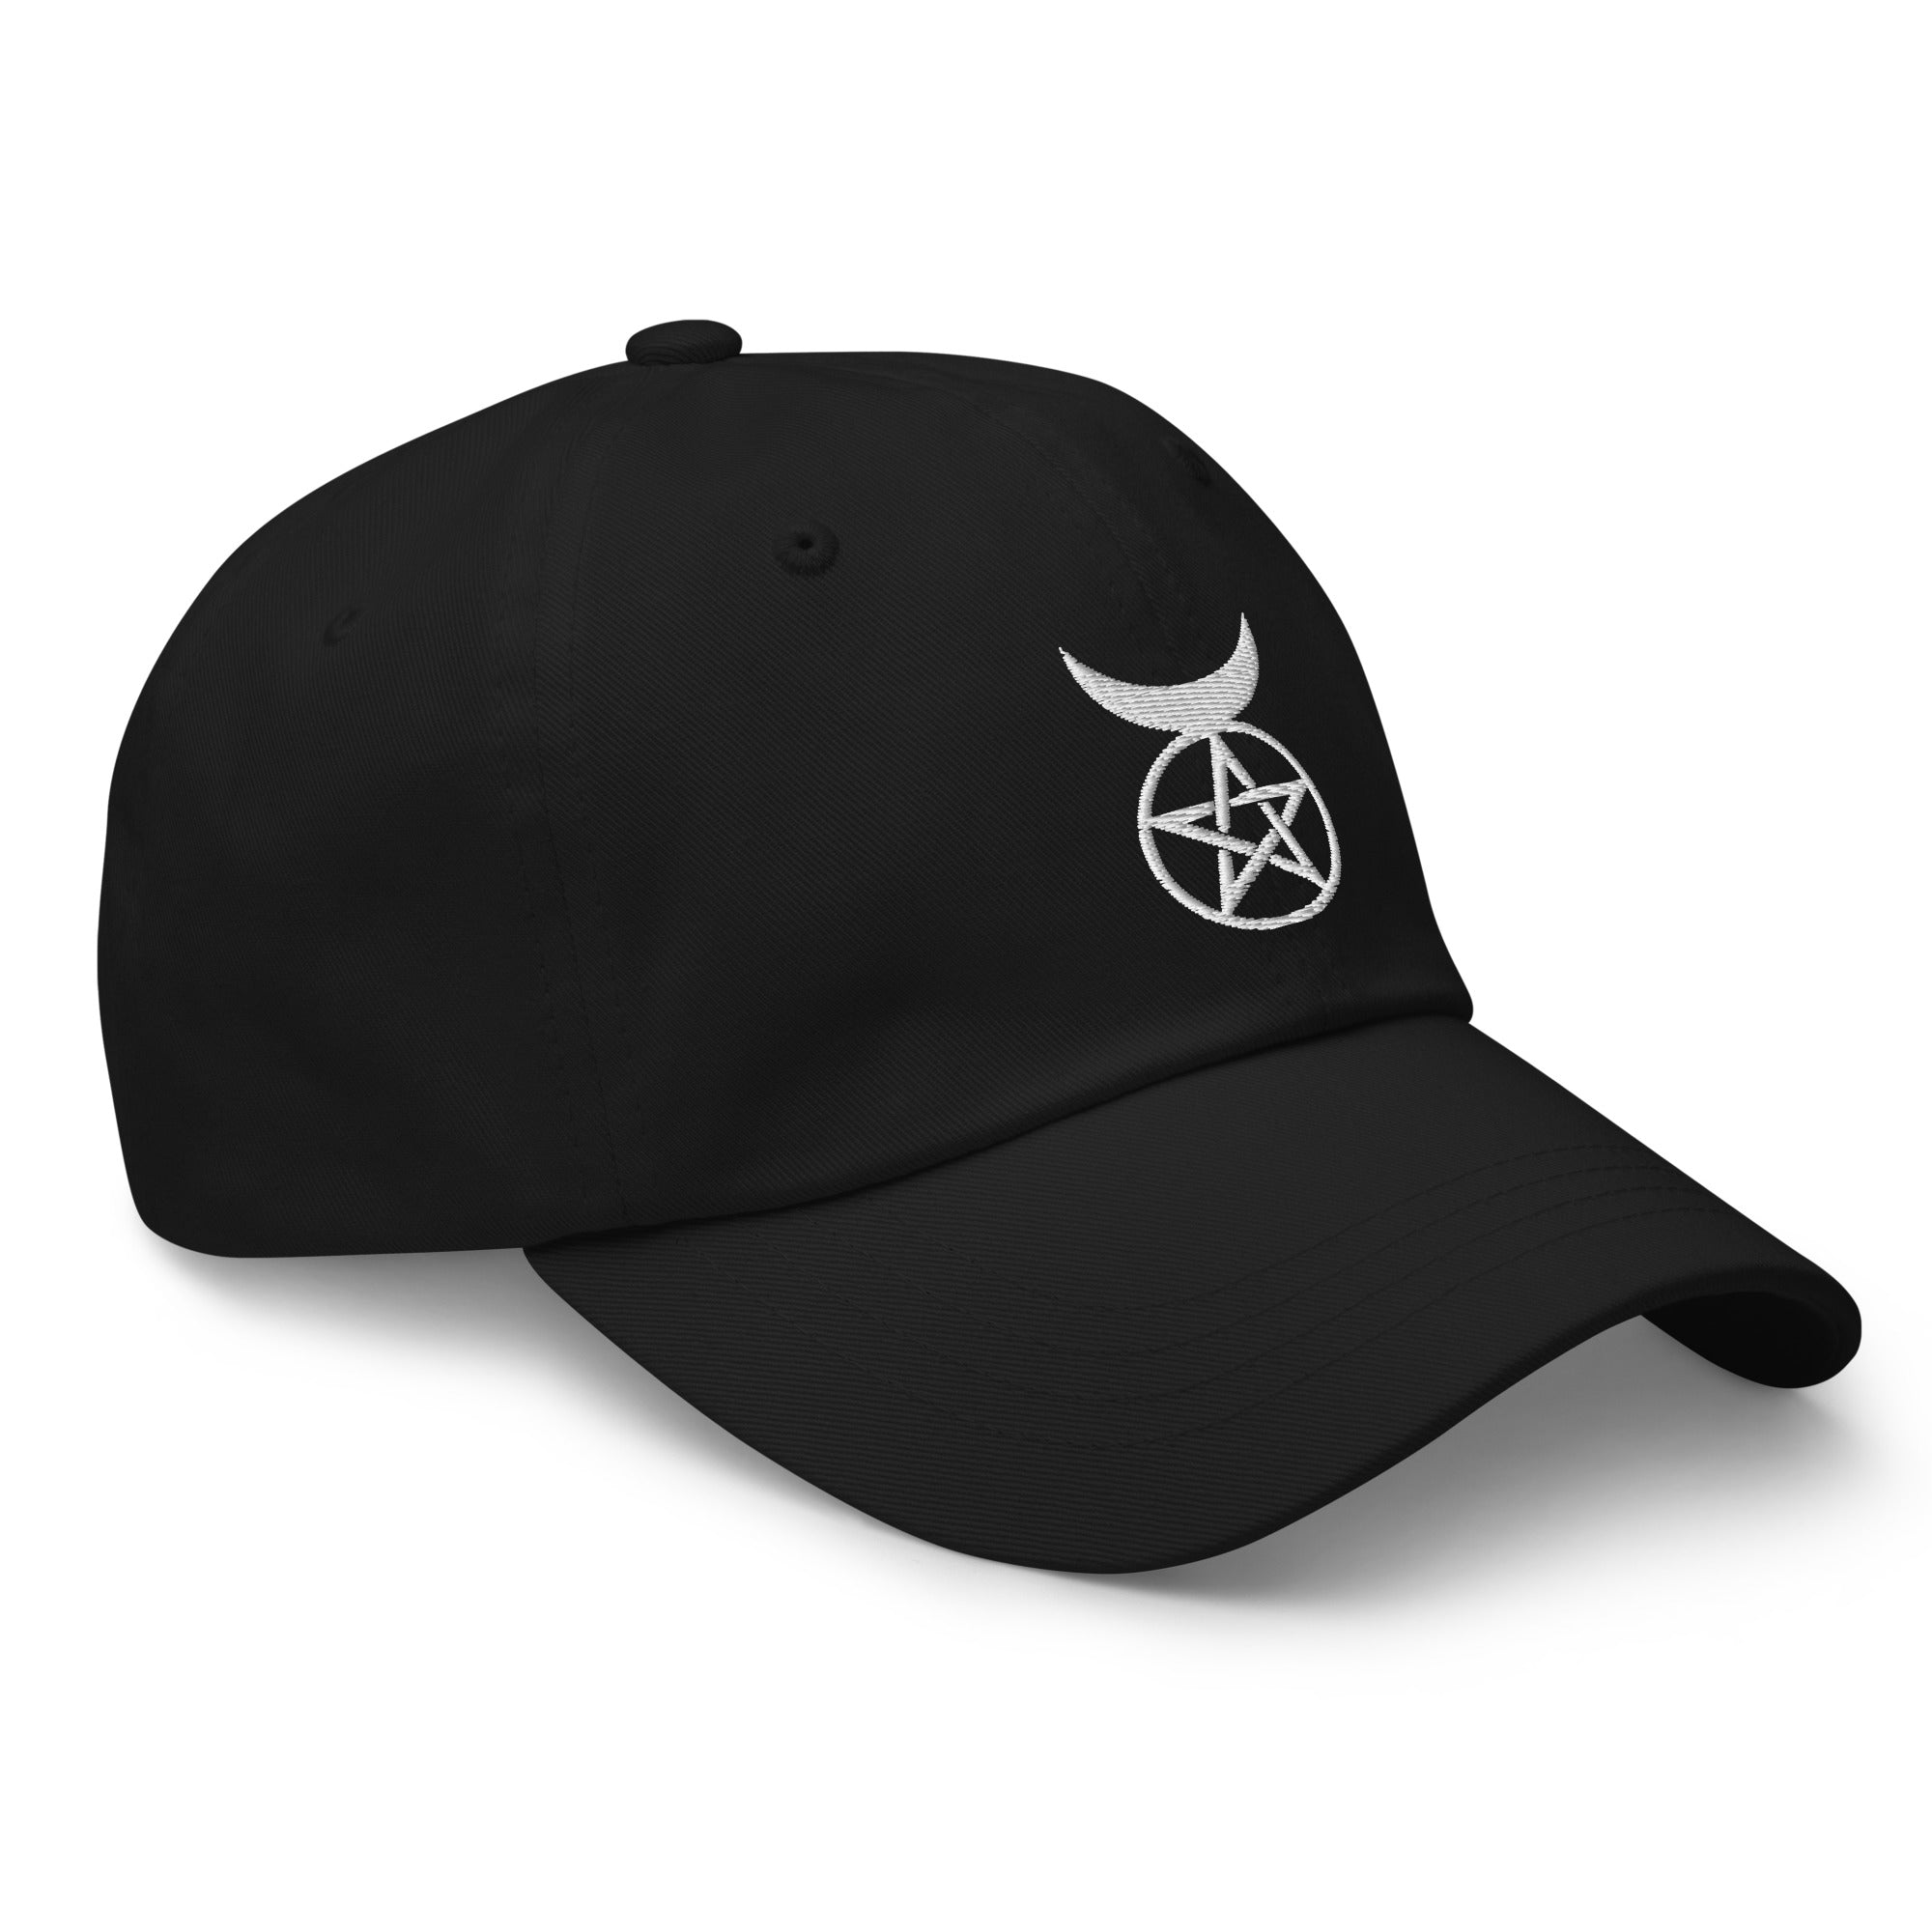 The Horned God Embroidered Baseball Cap Wicca Neopaganism Symbol Dad hat - Edge of Life Designs